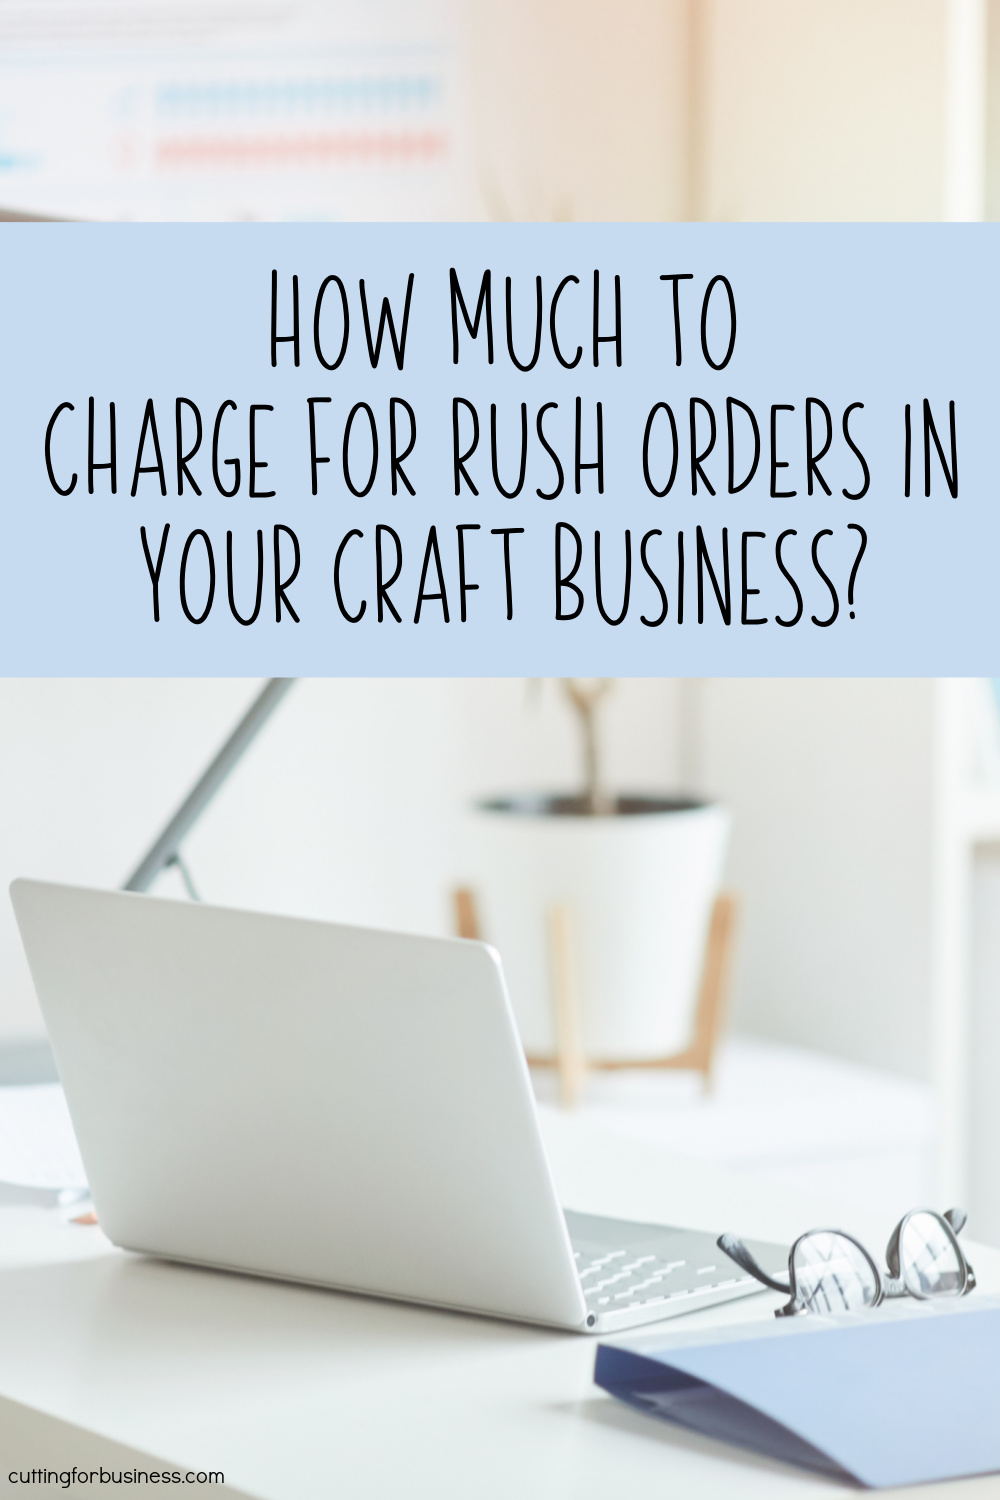 How much to charge for rush orders in your craft business? By cuttingforbusiness.com.